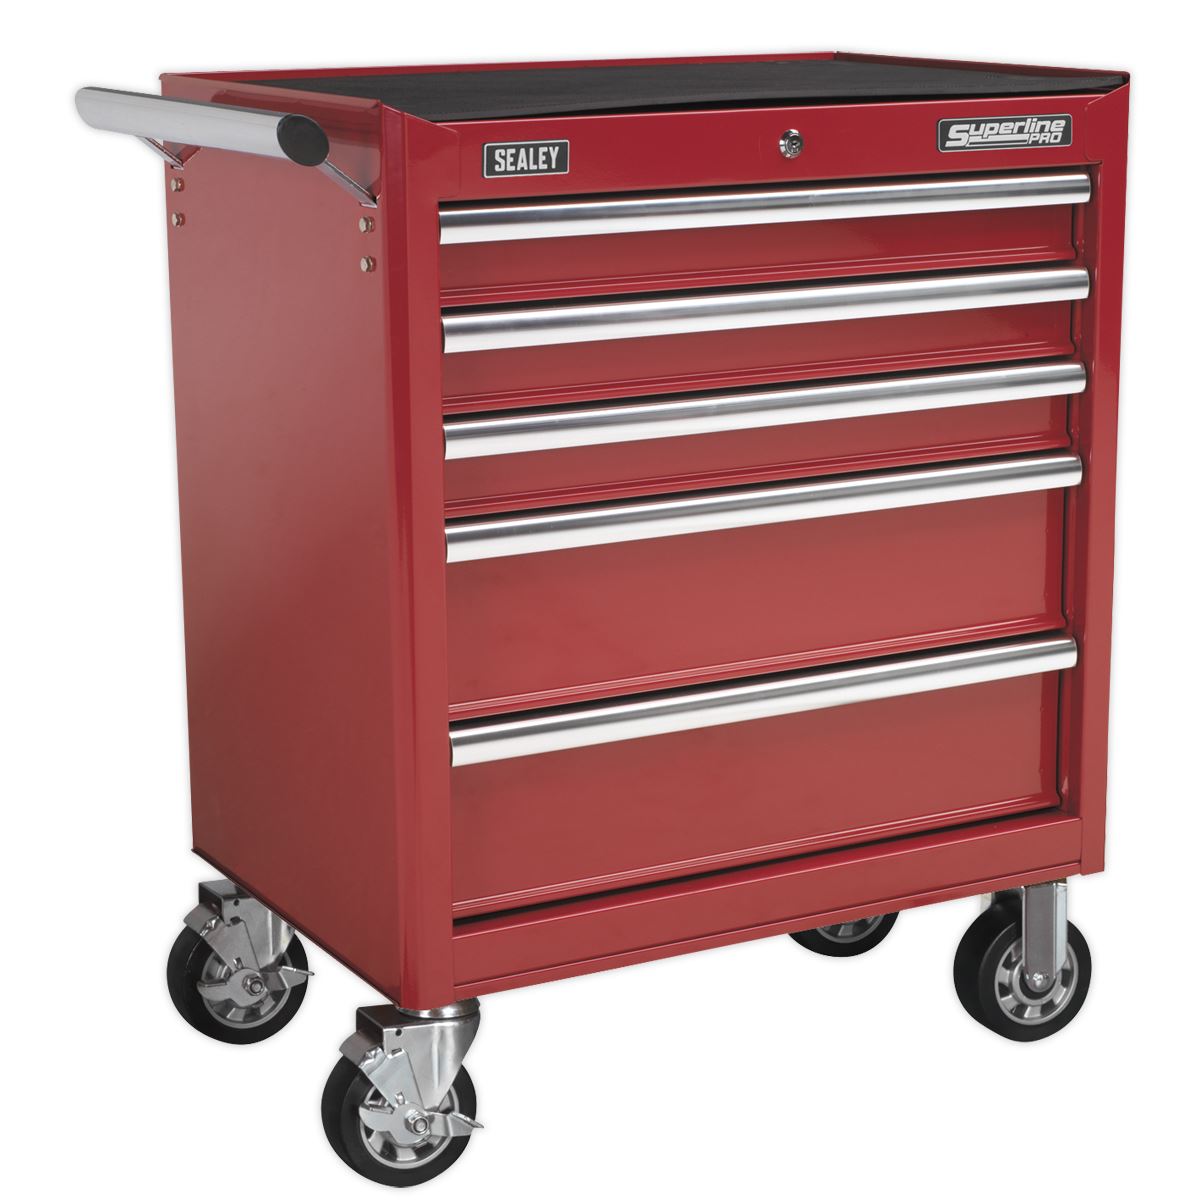 Sealey Superline Pro Rollcab 5 Drawer with Ball-Bearing Slides - Red